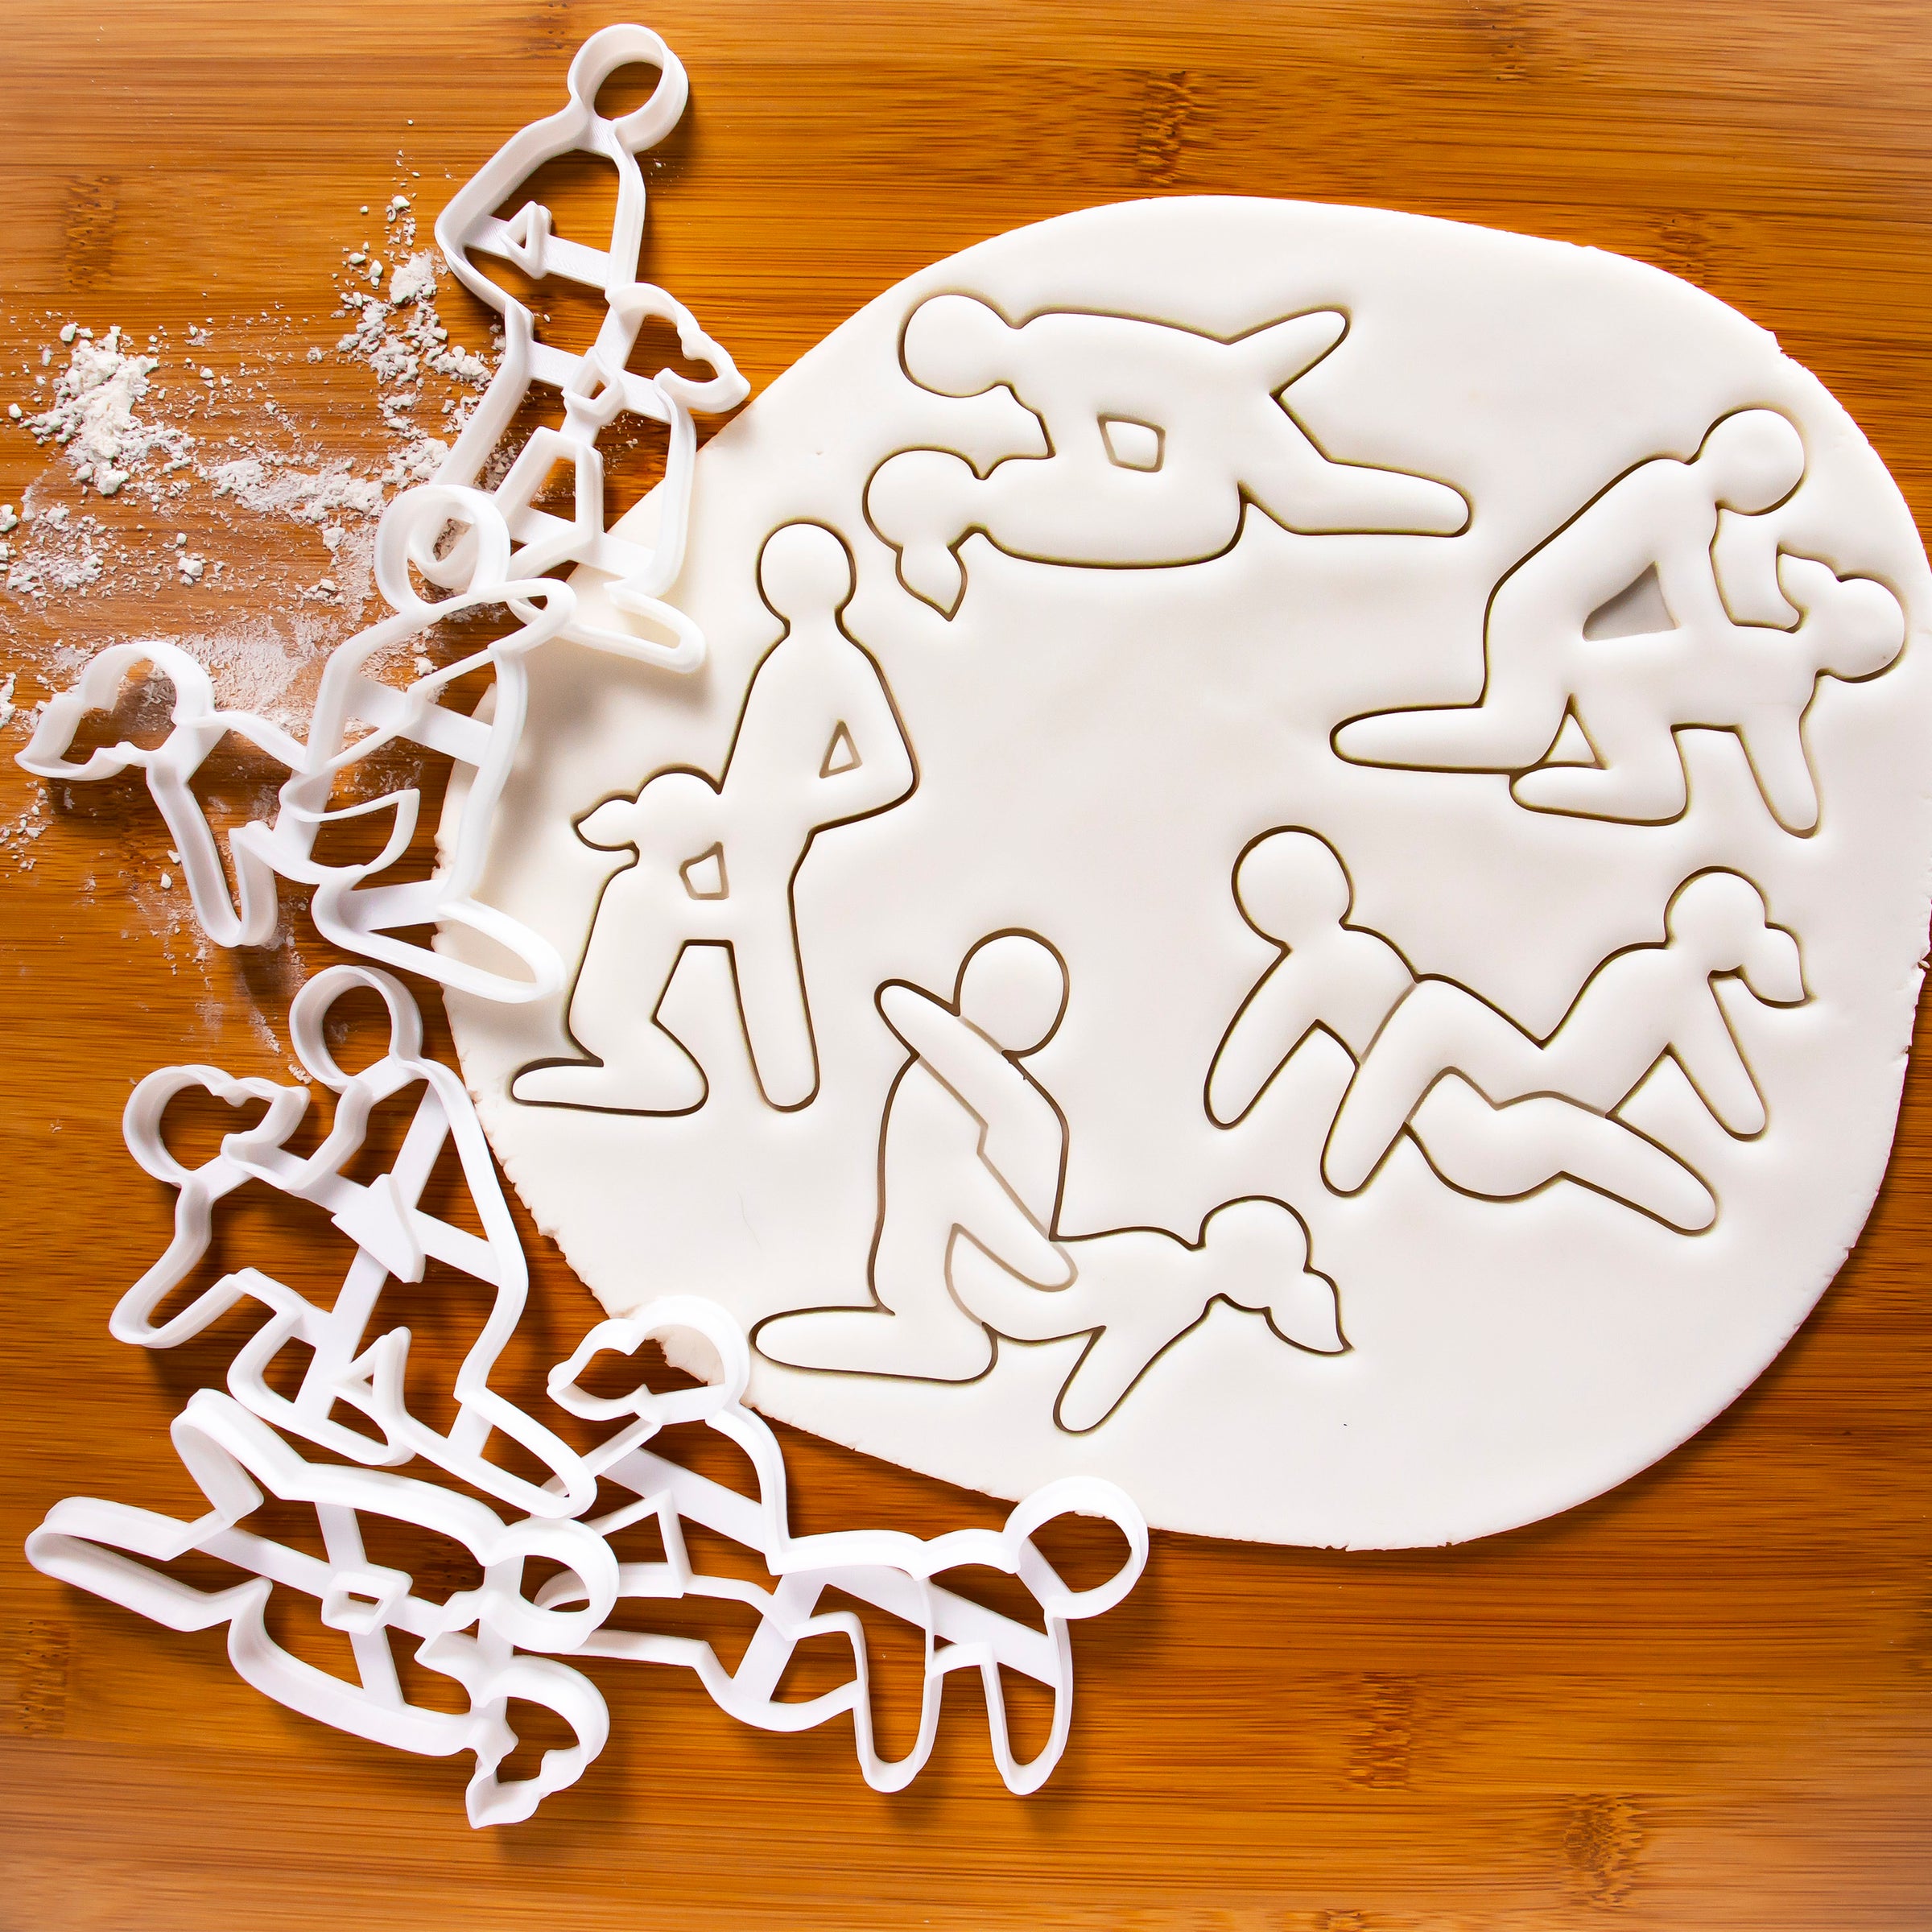 set of 5 sex position cookie cutters: missionary blowjob doggy shoulder holder spider